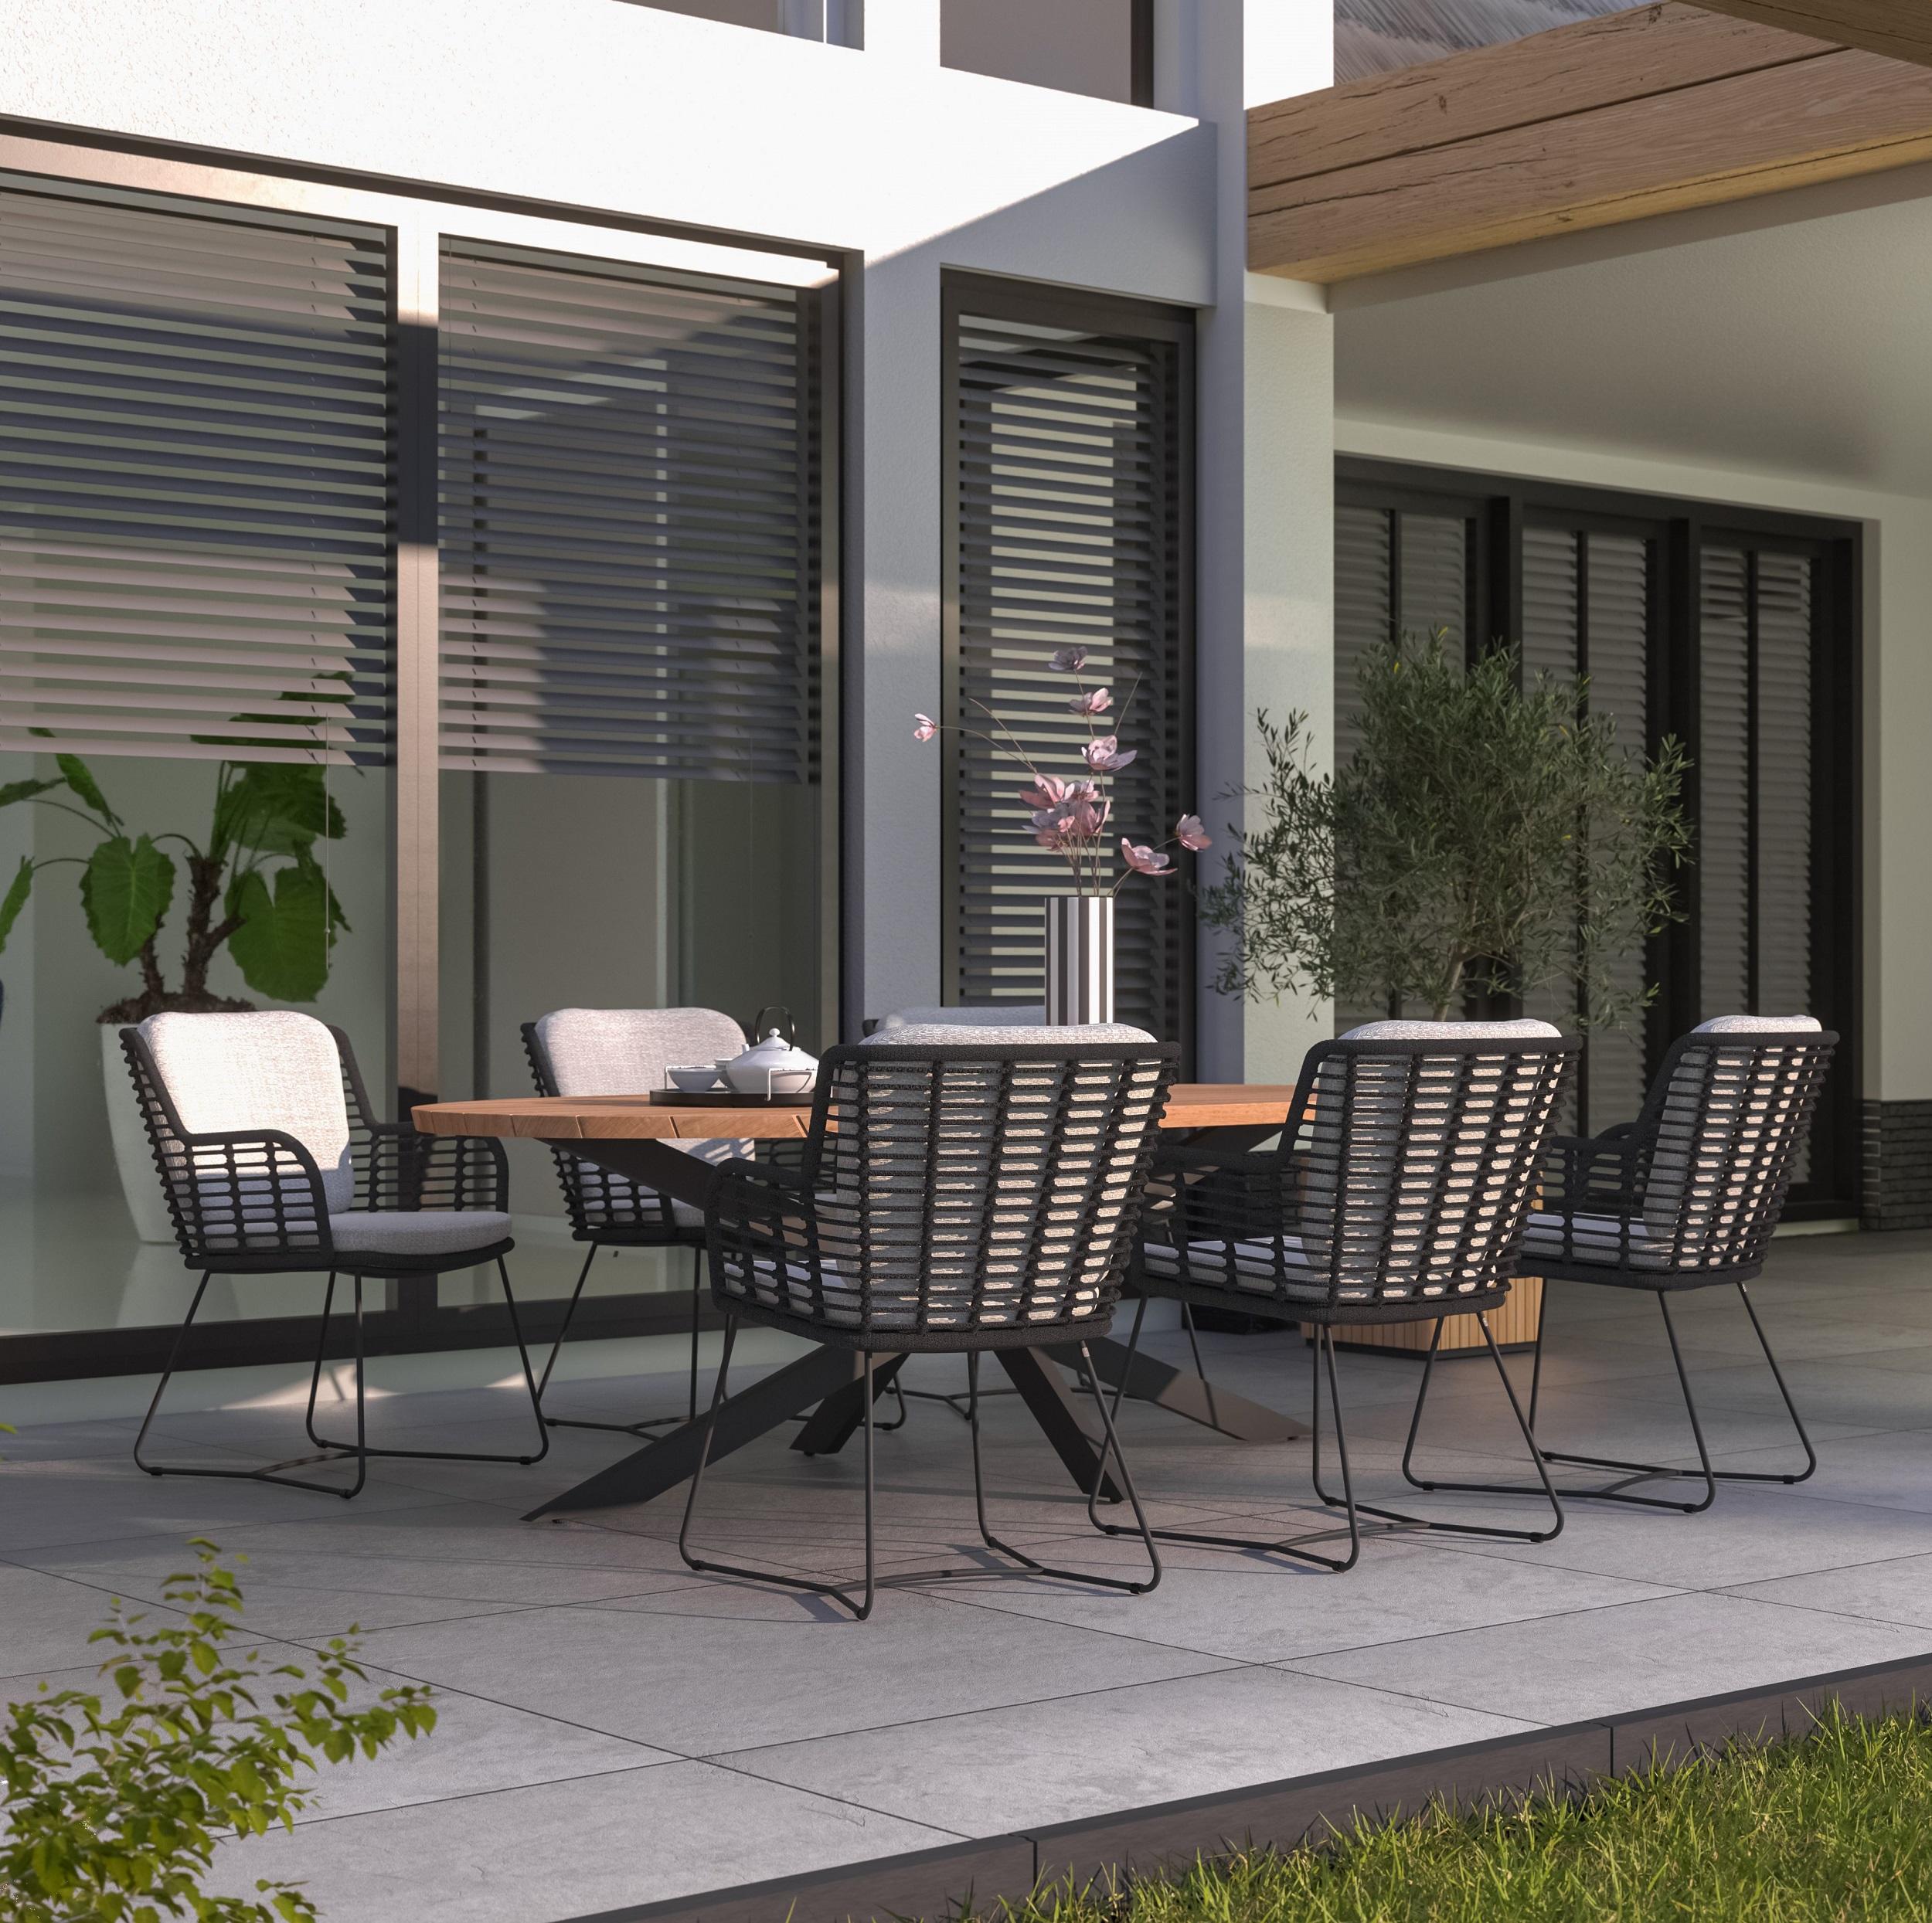 grey rope weave modern garden dining chairs with a large oval teak garden patio dining table with aluminium legs